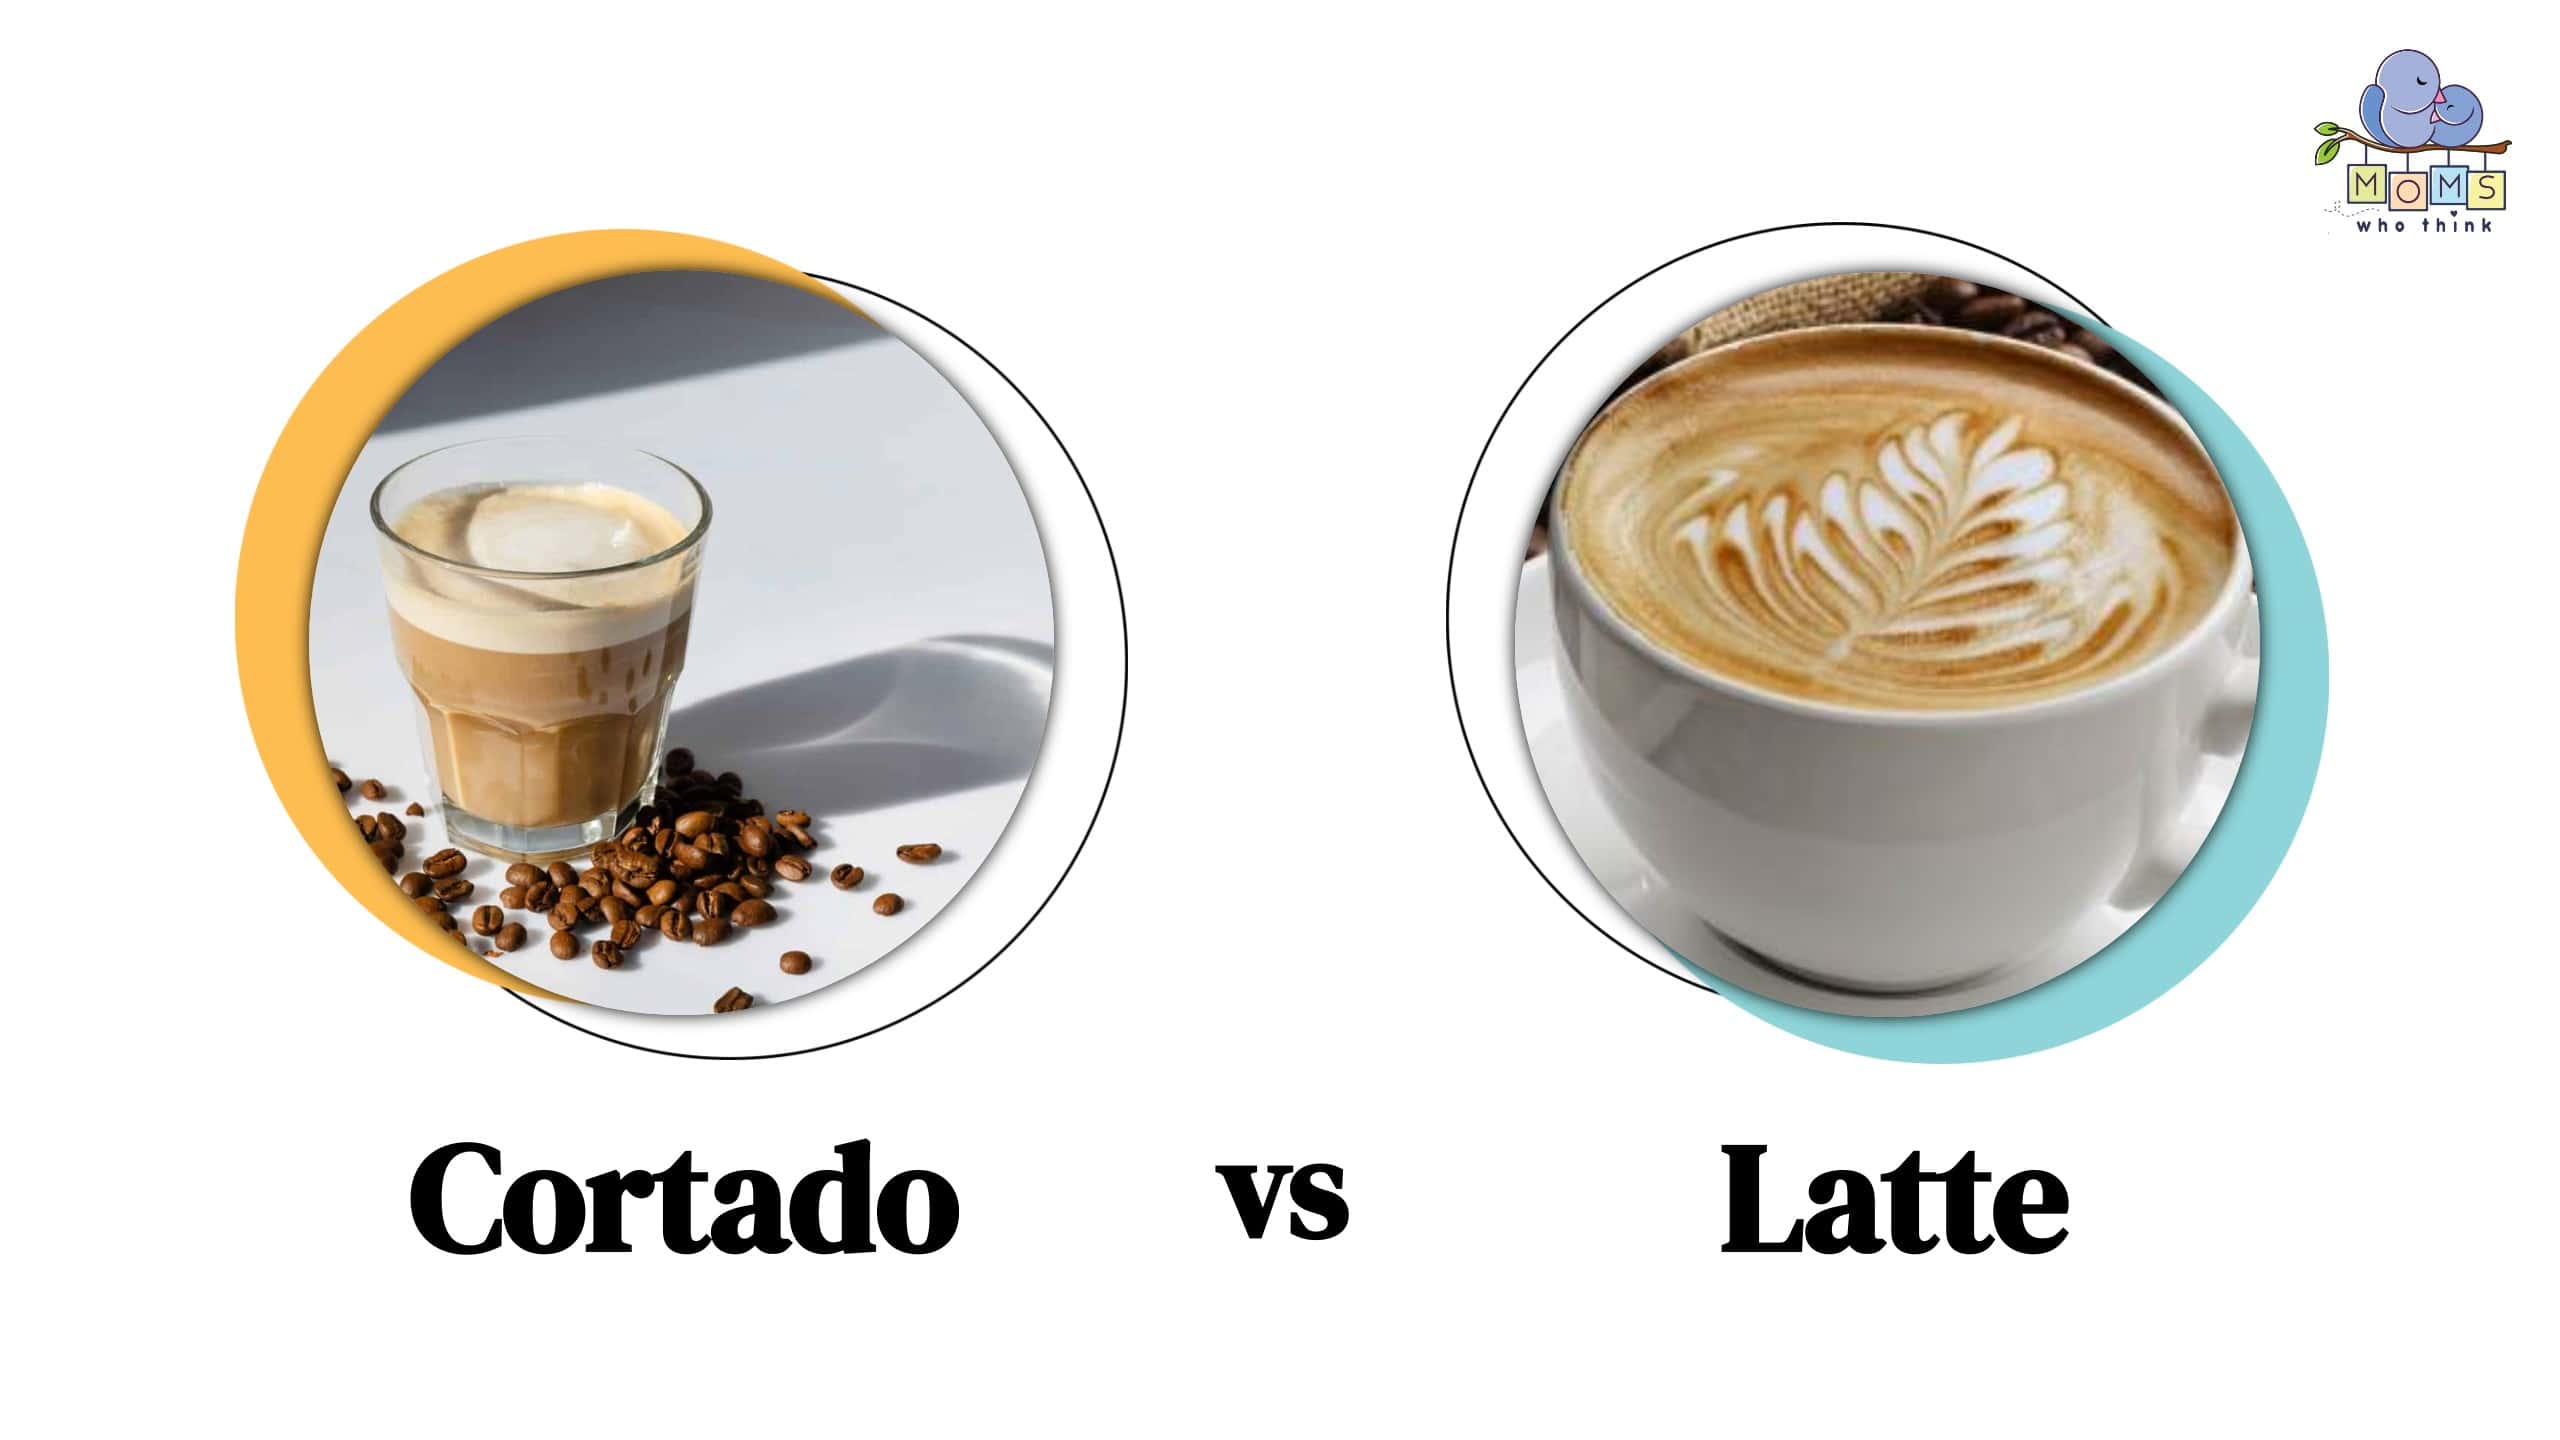 What Is a Cortado Coffee?